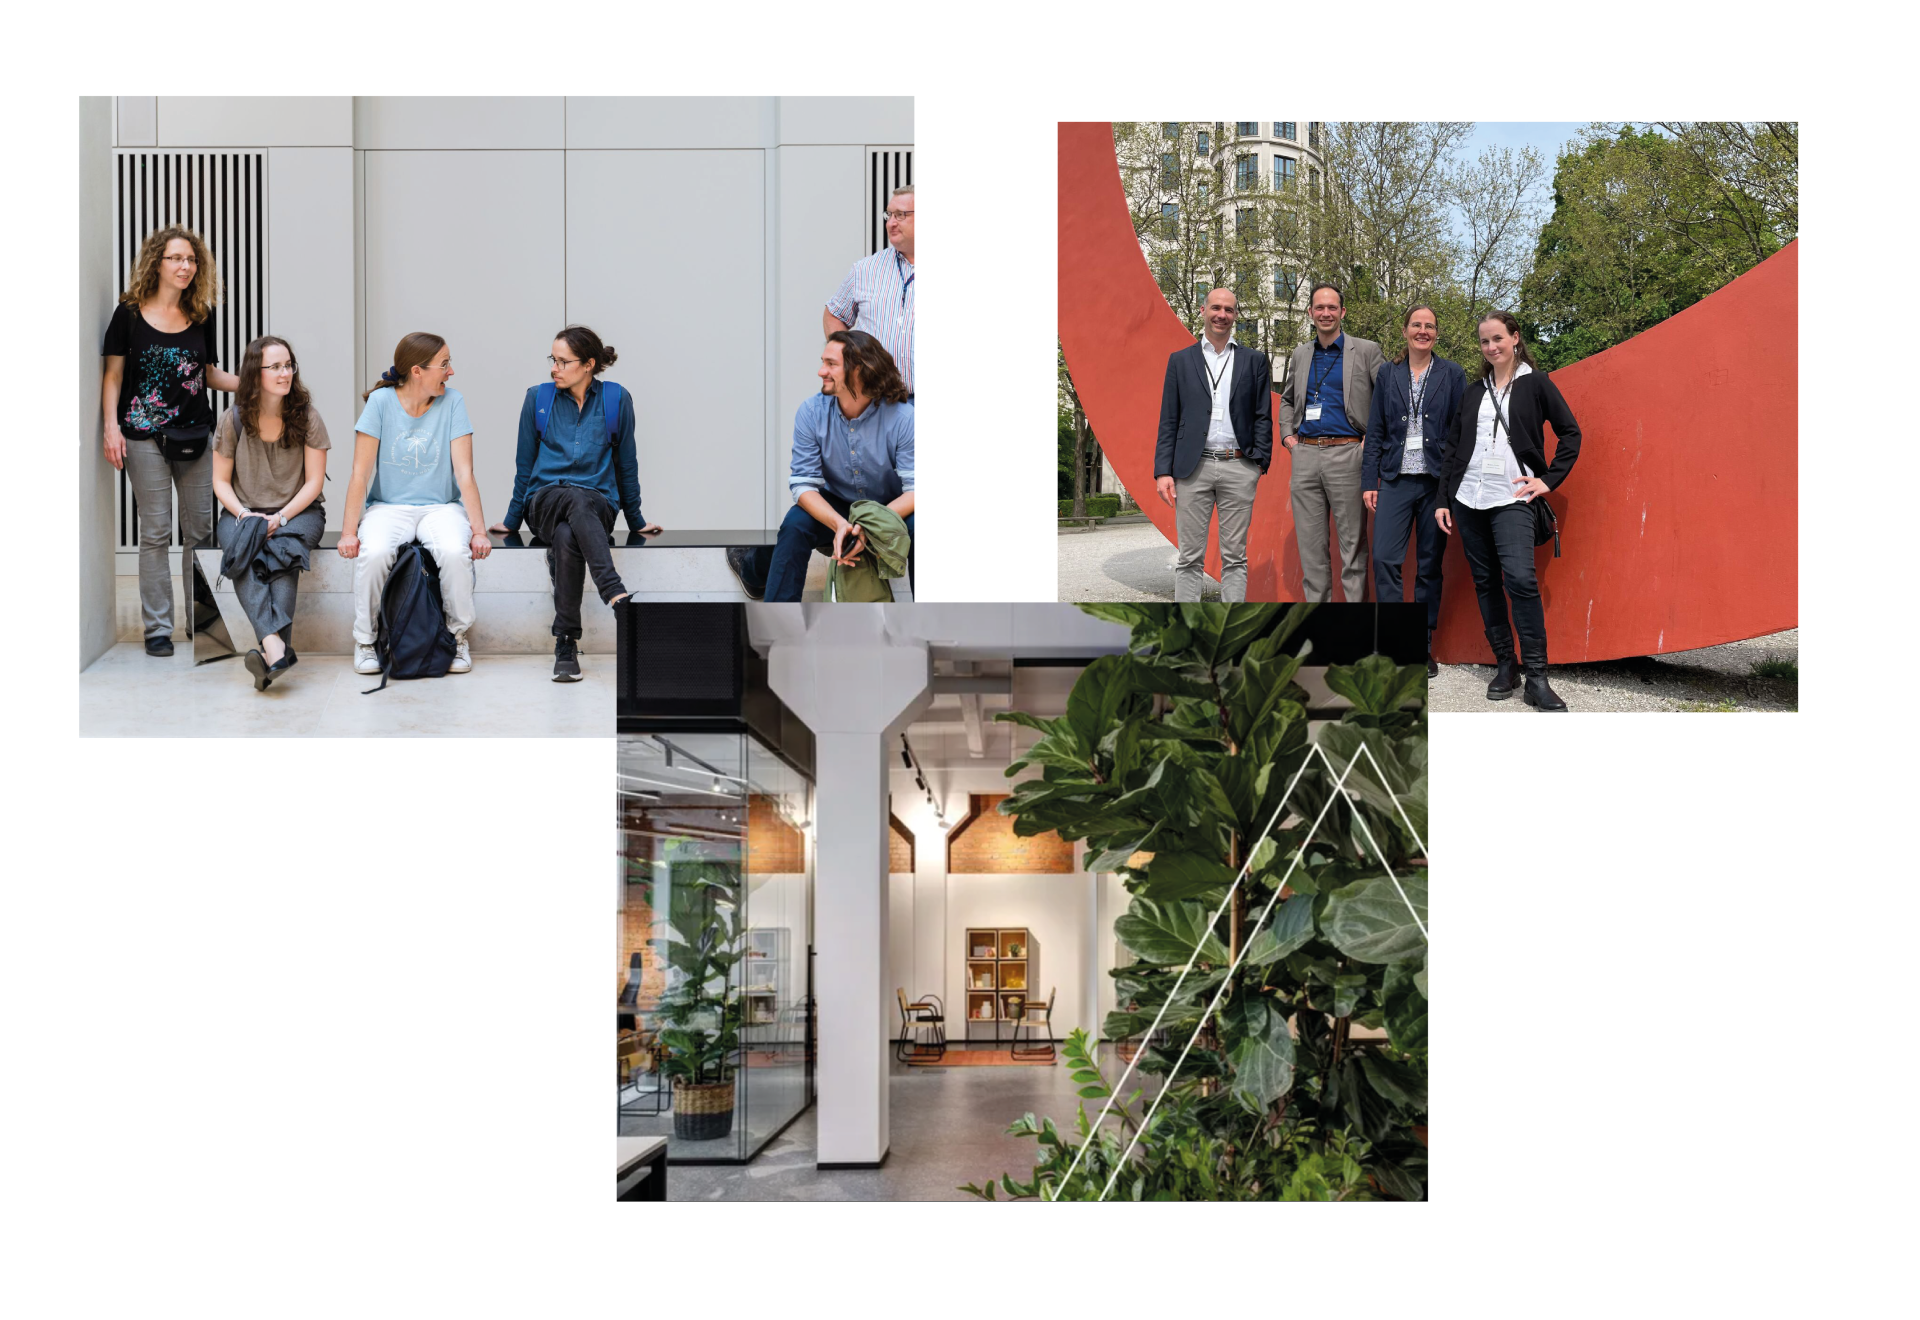 Three images. Top left: five people sit on a bench chatting to each other. Top right: two women and two men in jackets and smart trousers stand in front of an outdoor piece of art. Bottom: a bright, white and gold, well-lit office space with plants.